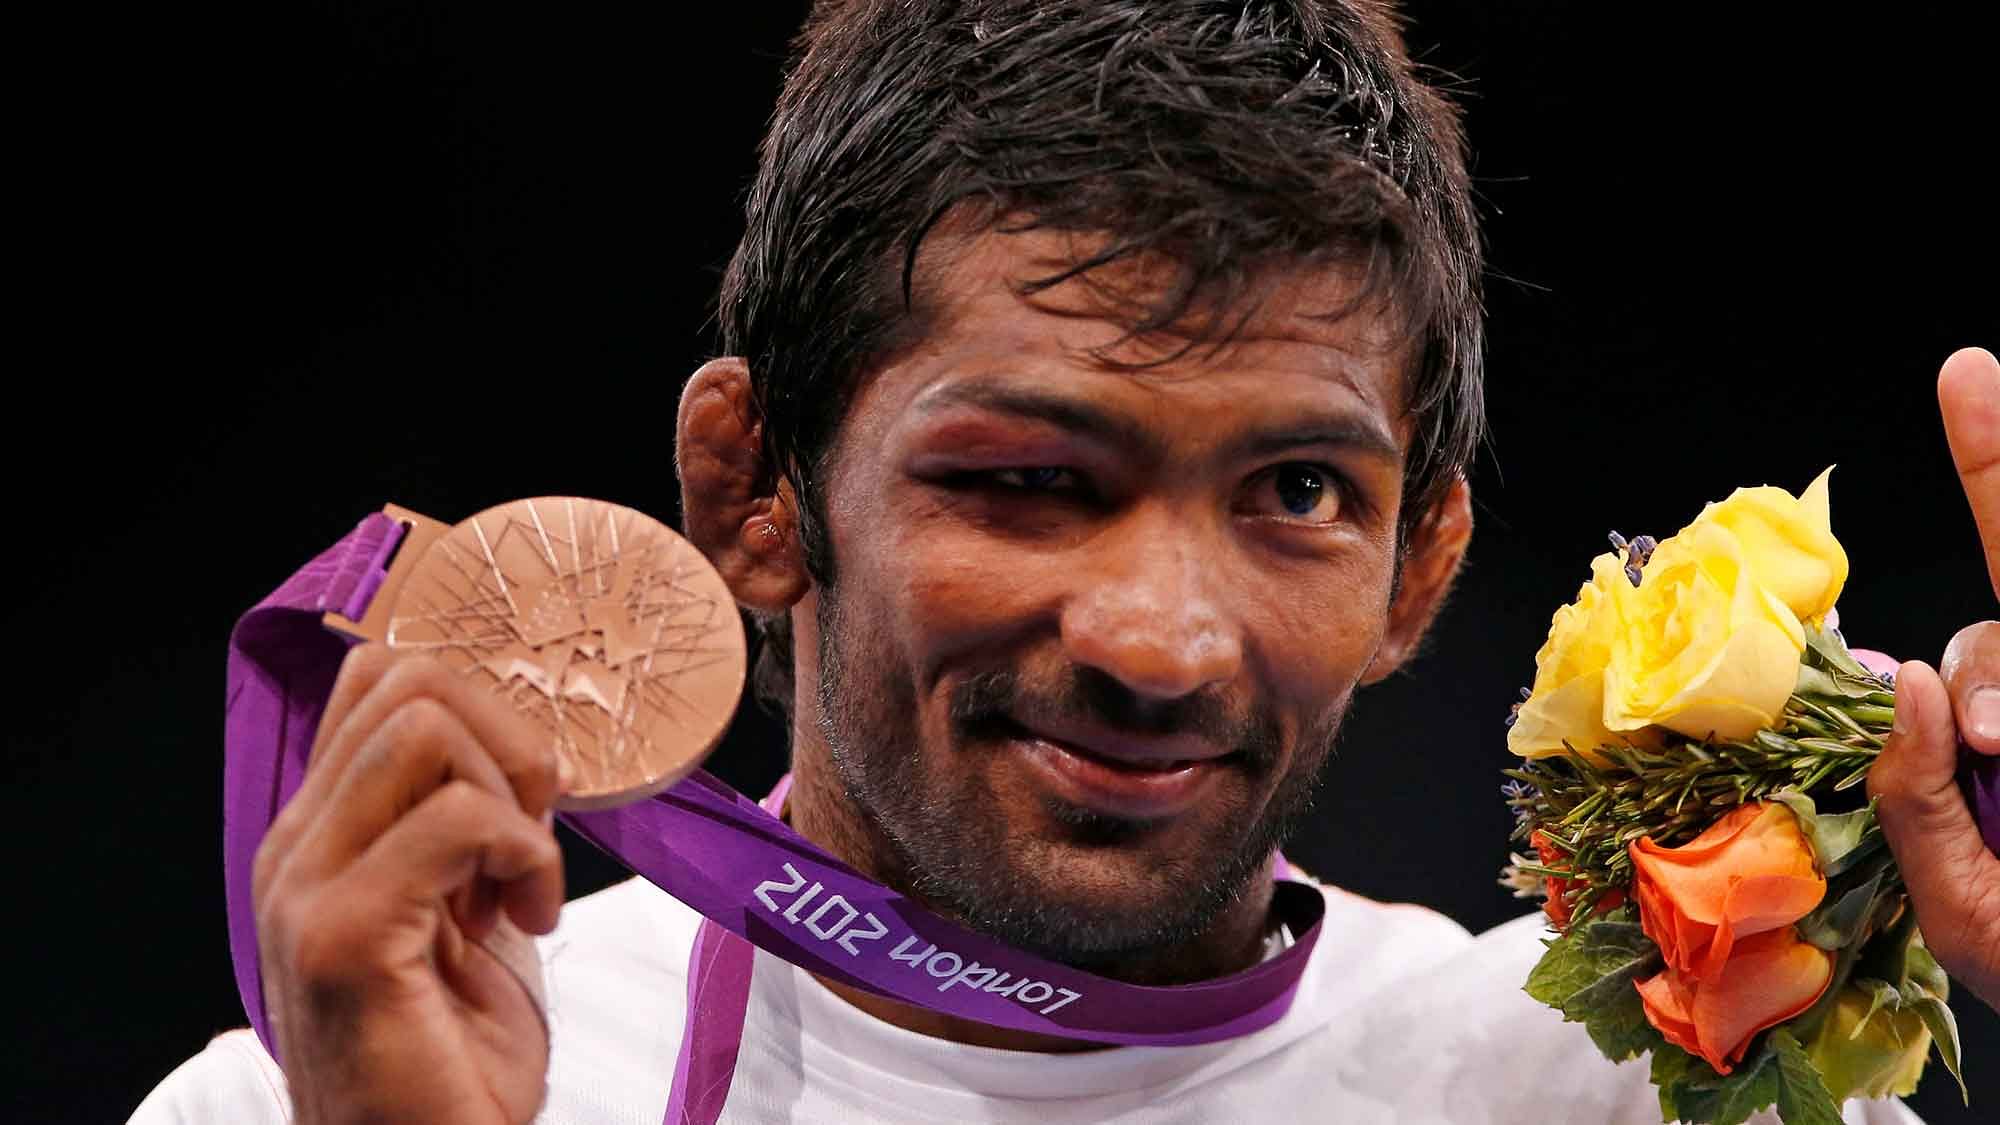 Yogeshwar Dutt with the bronze medal he won at the London Olympics. (Photo: Reuters)